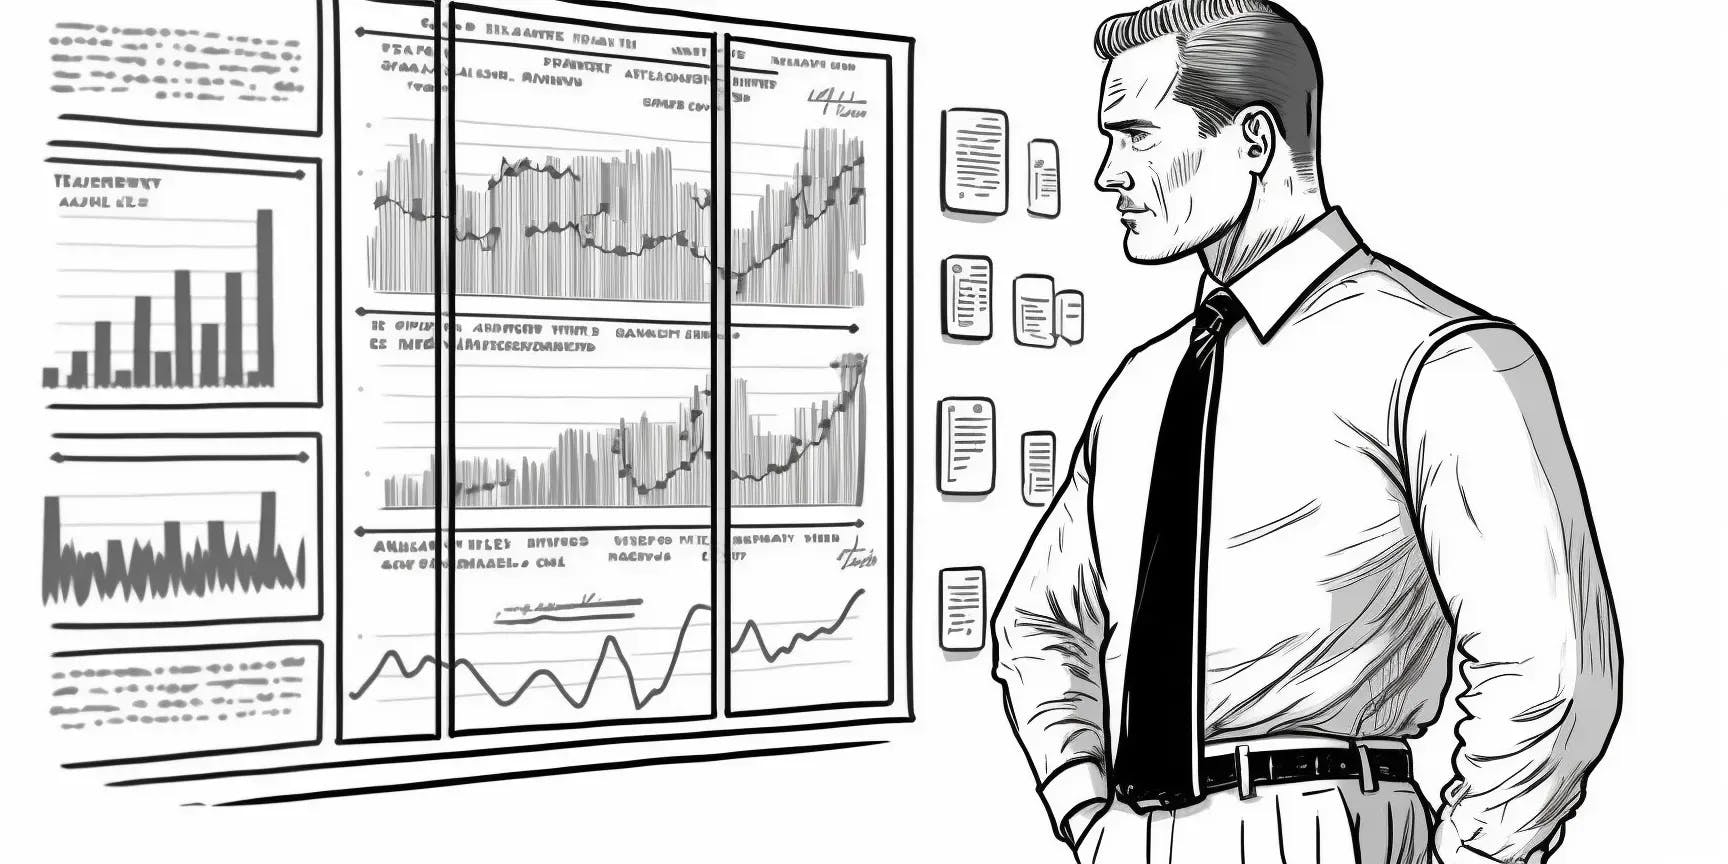 A man looking concerned starring at a panel filled with various graphs.